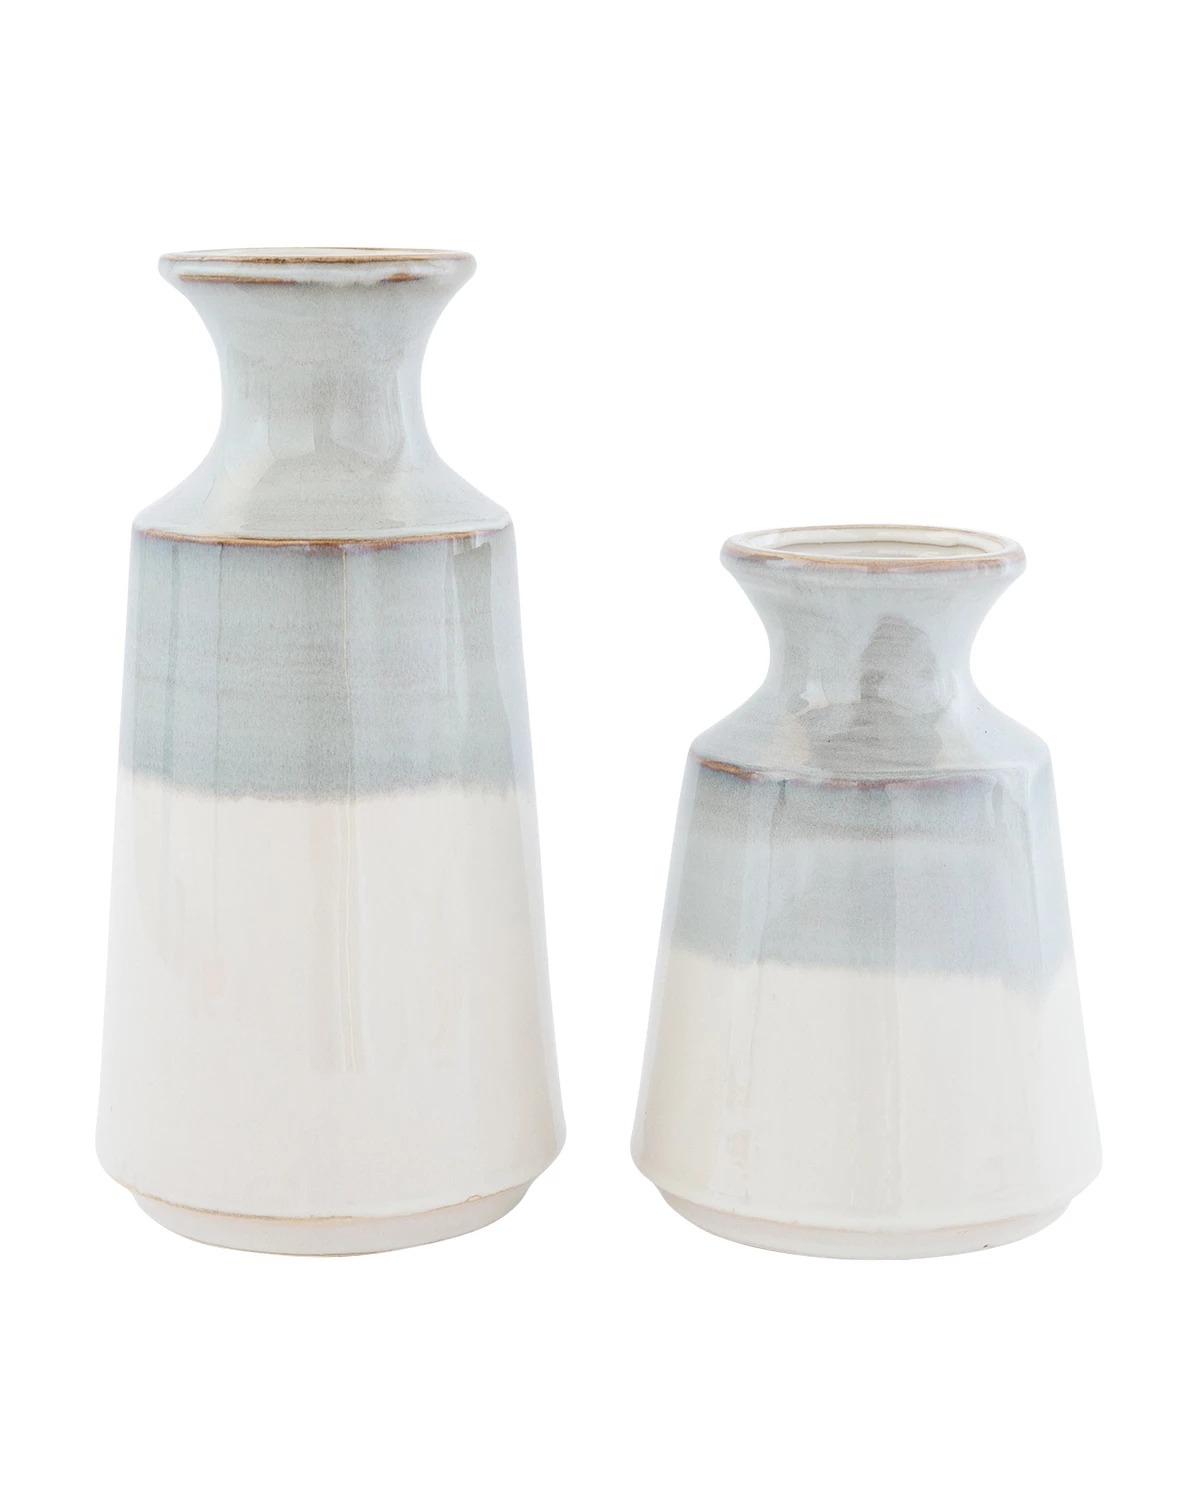 GRAY DIPPED VASE - SMALL - Image 1